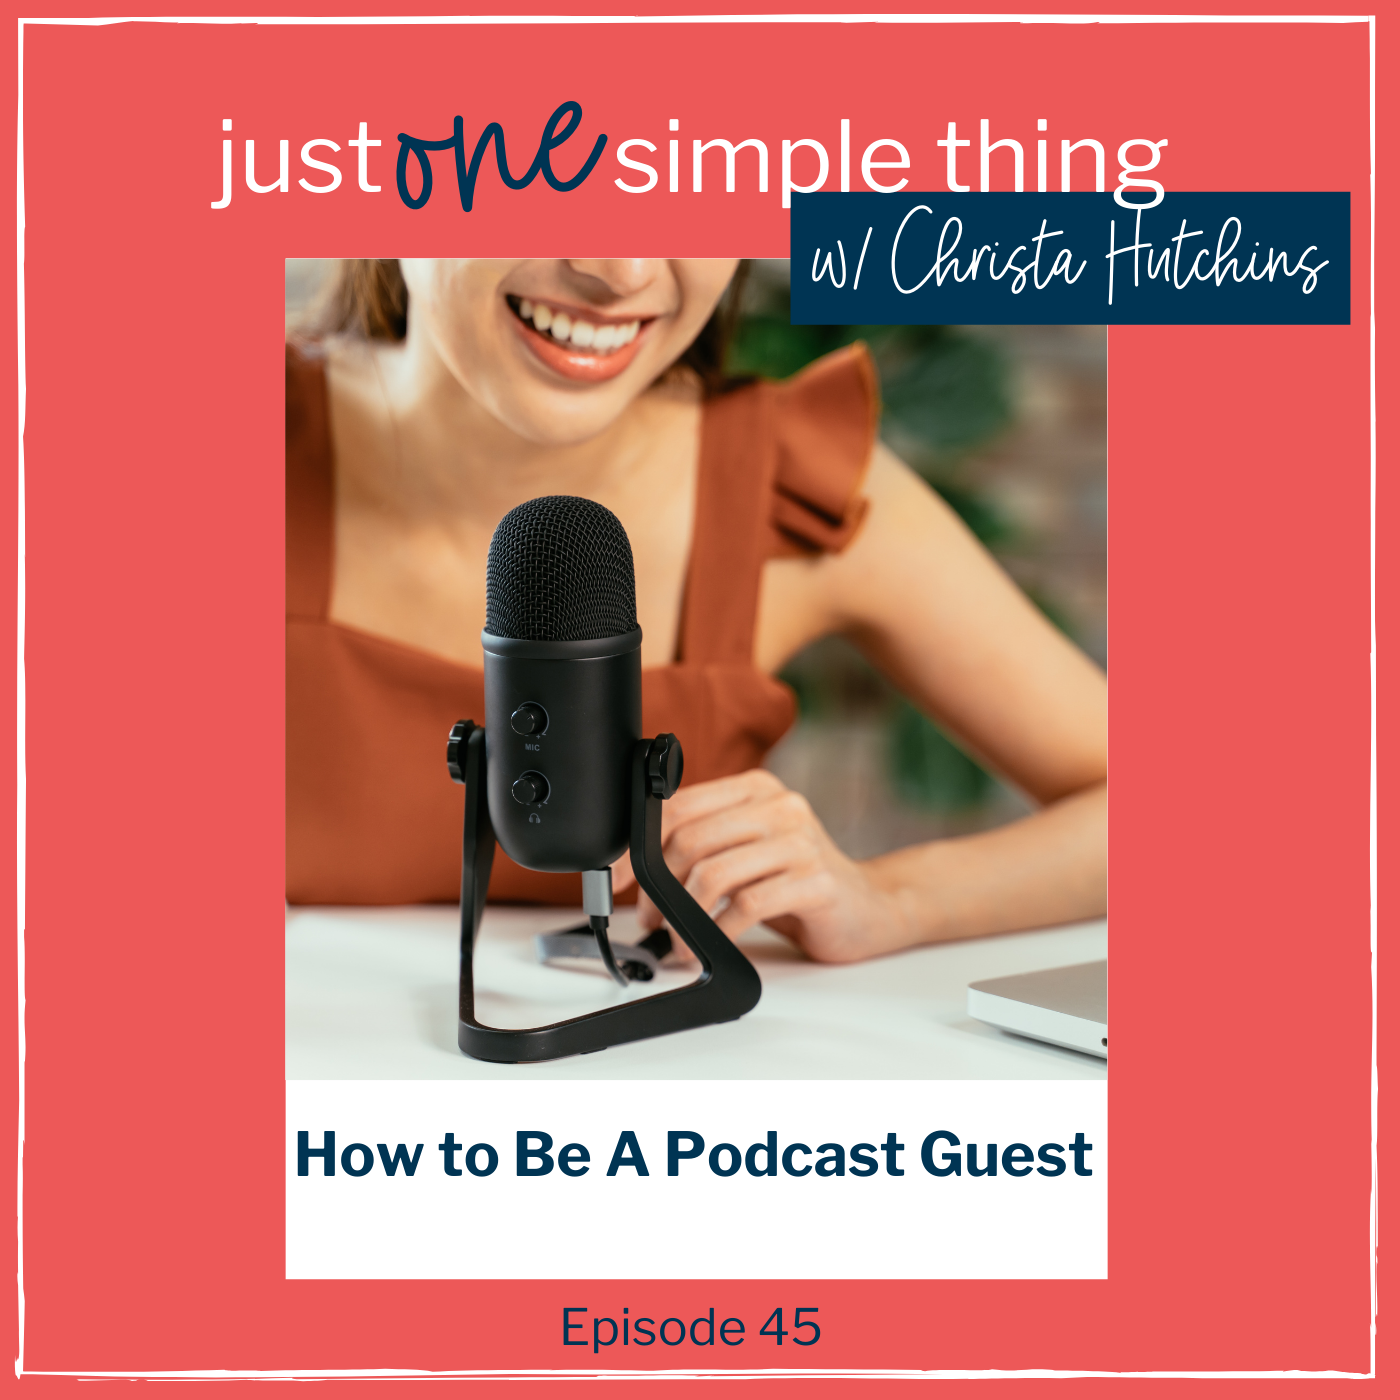 How to Be a Podcast Guest